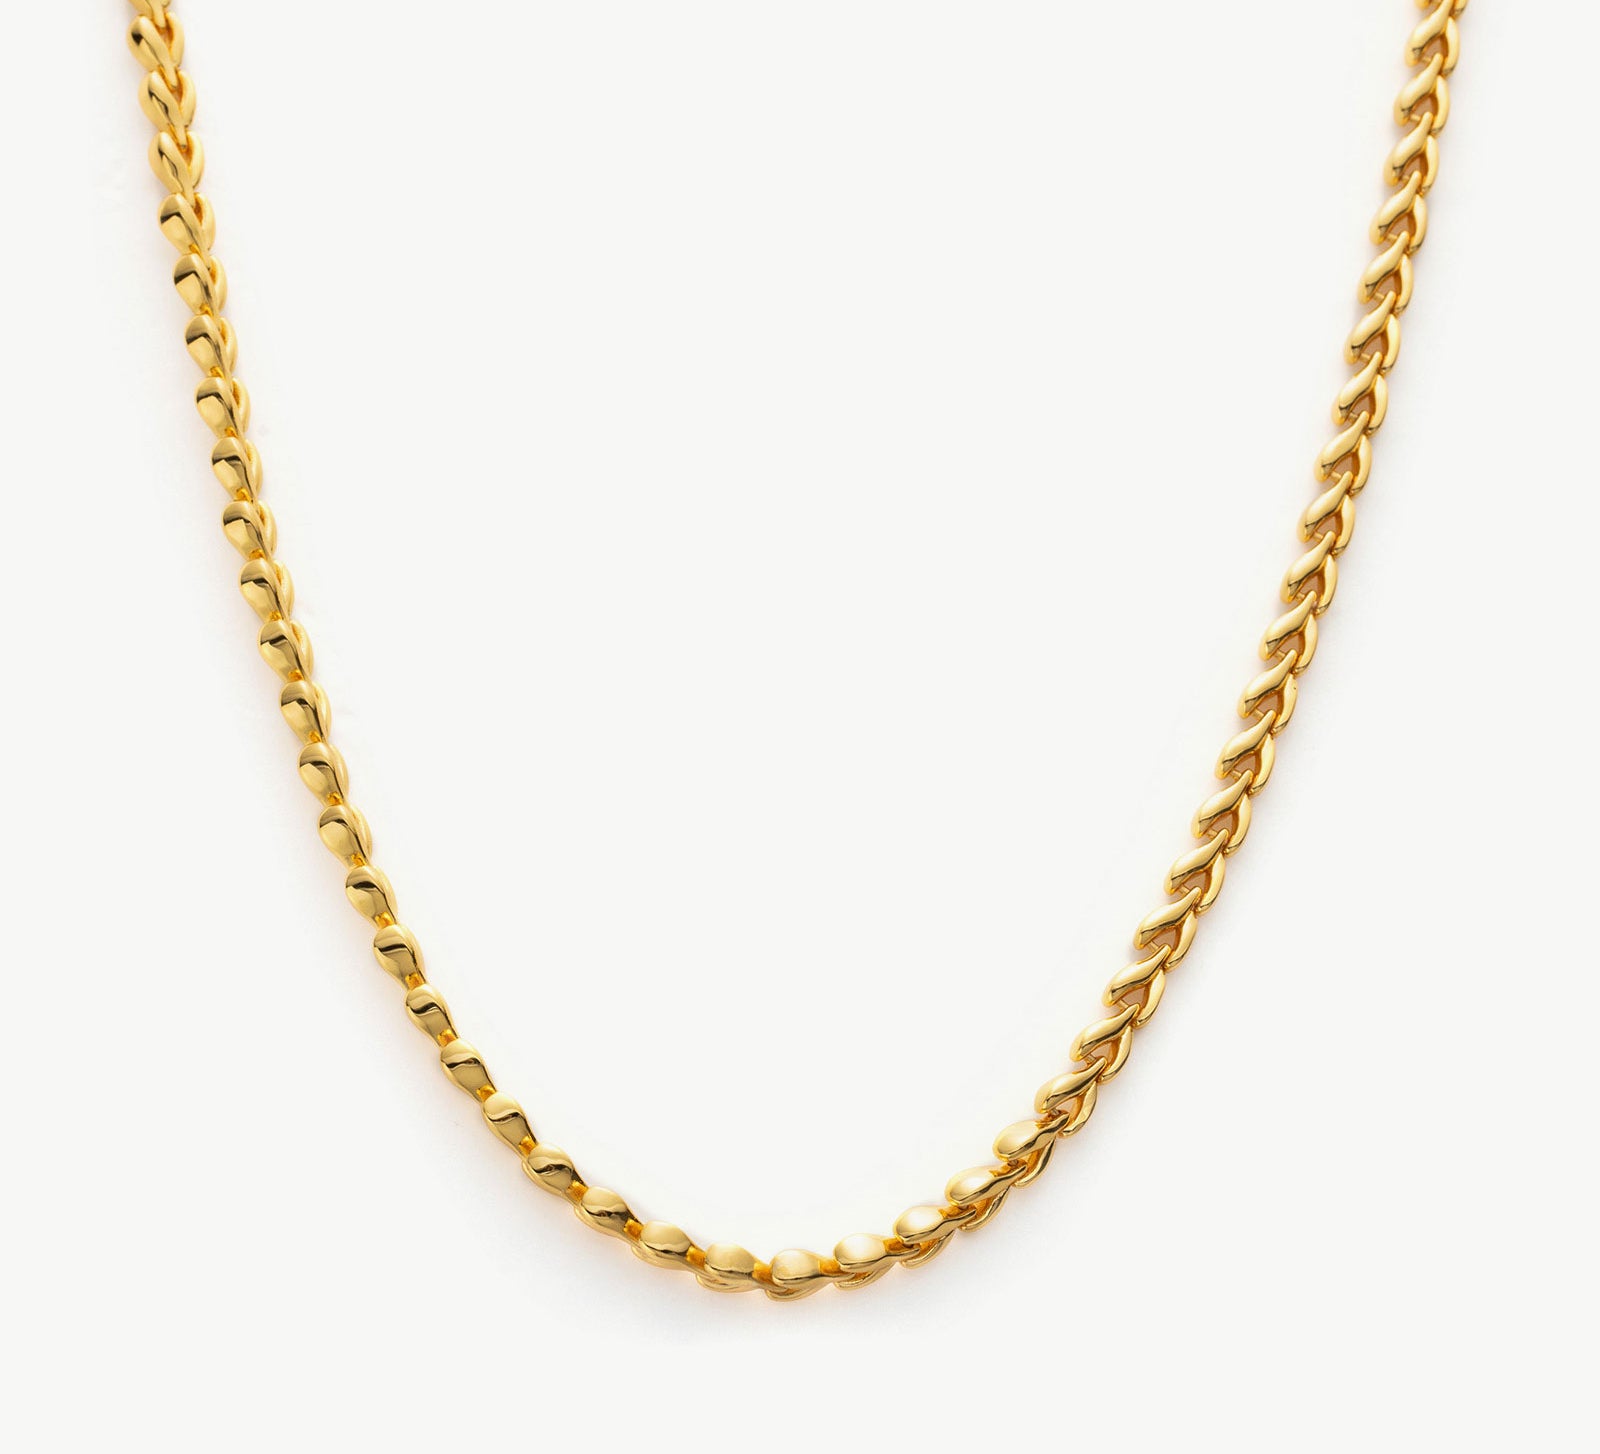 Heart Chain Necklace, a timeless piece featuring delicate heart-shaped links that form a classic and elegant necklace, adding a touch of romance to your everyday style